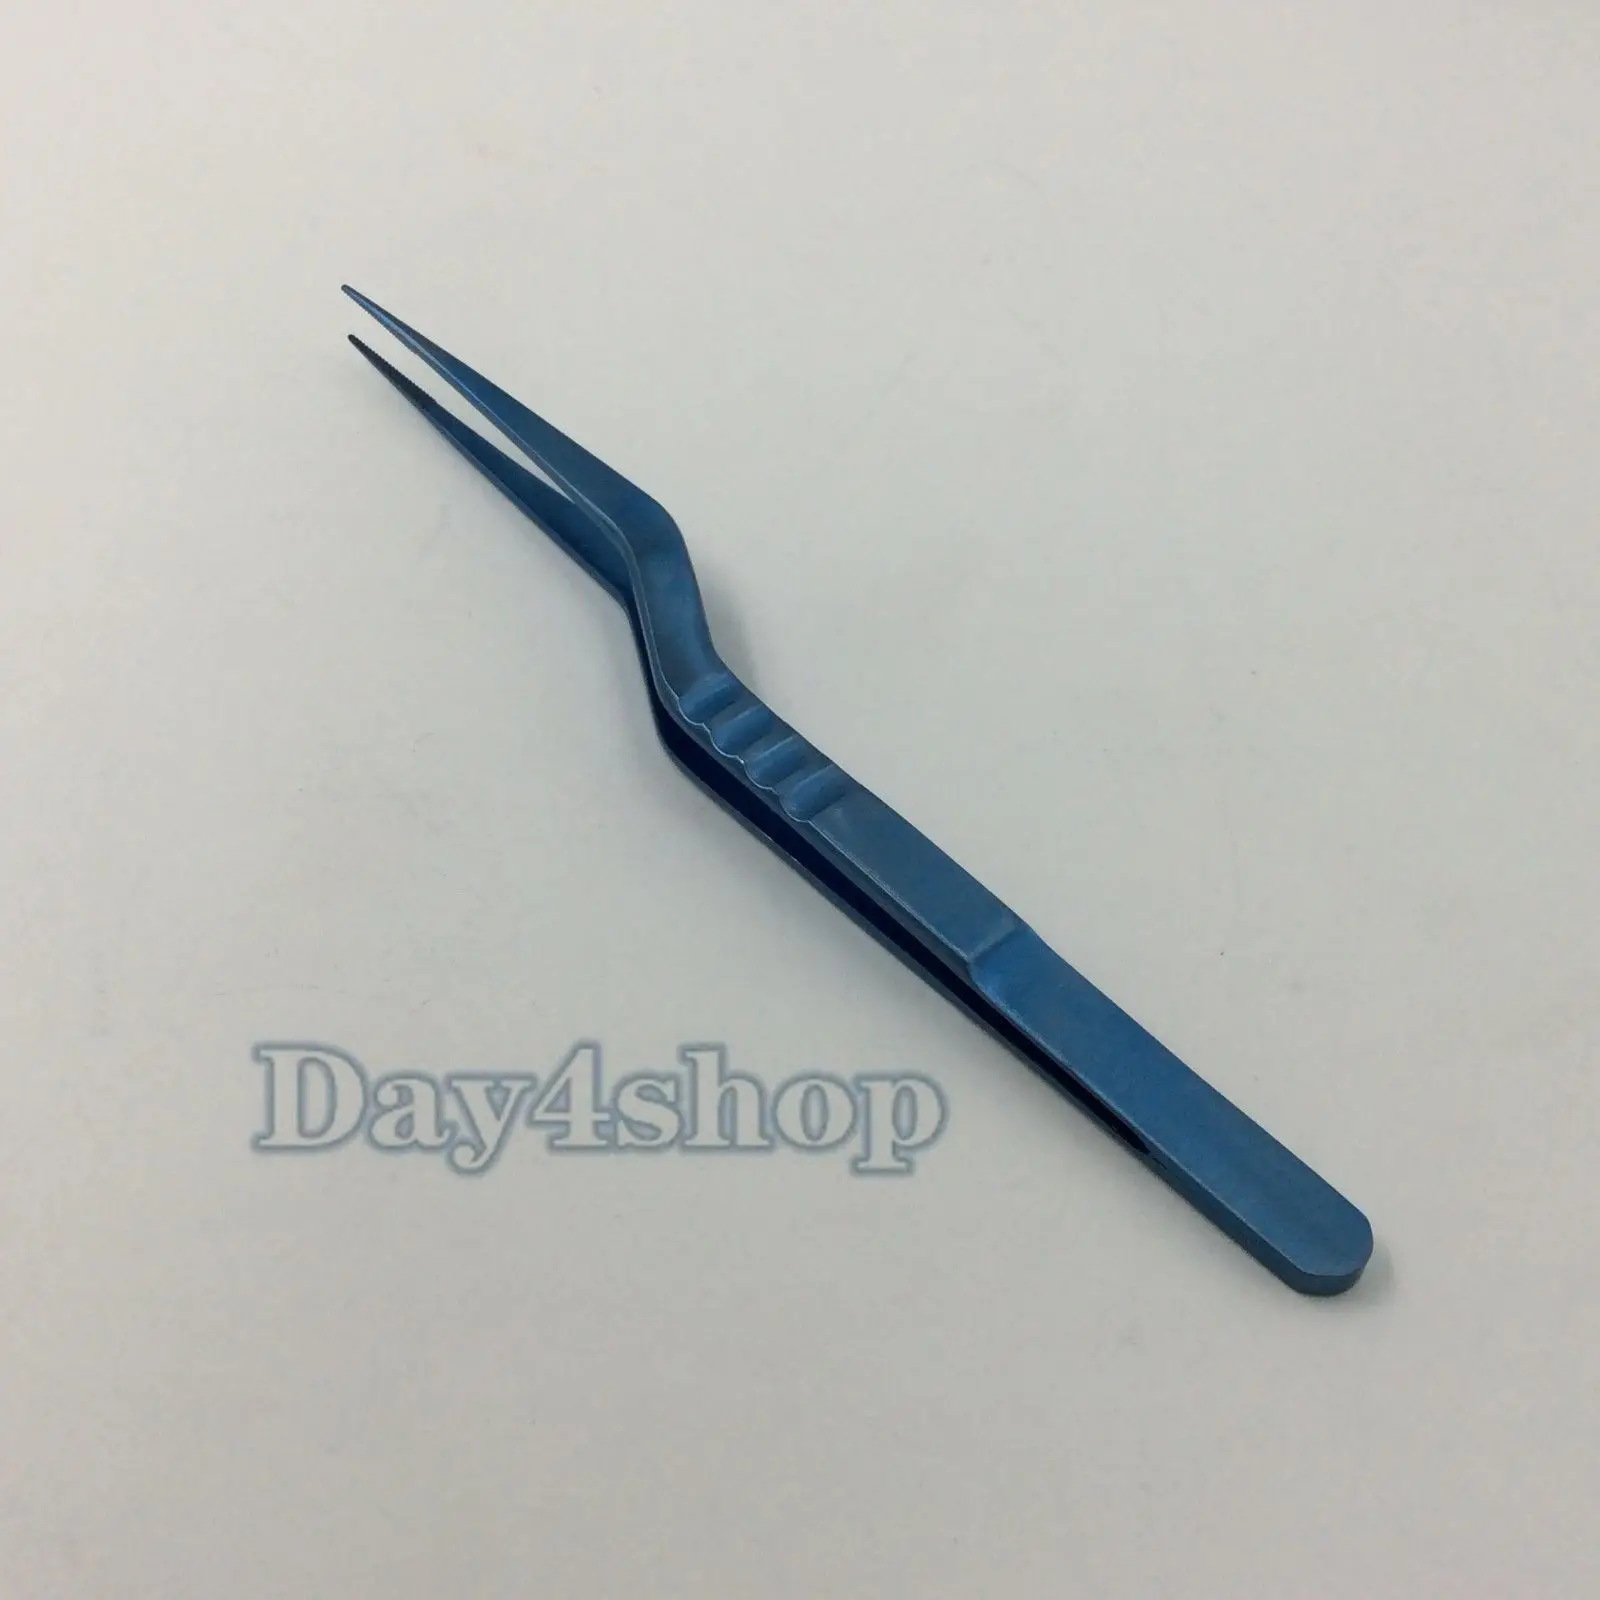 Titanium micro surgery forcep plastic ophthalmic eye surgical instrument